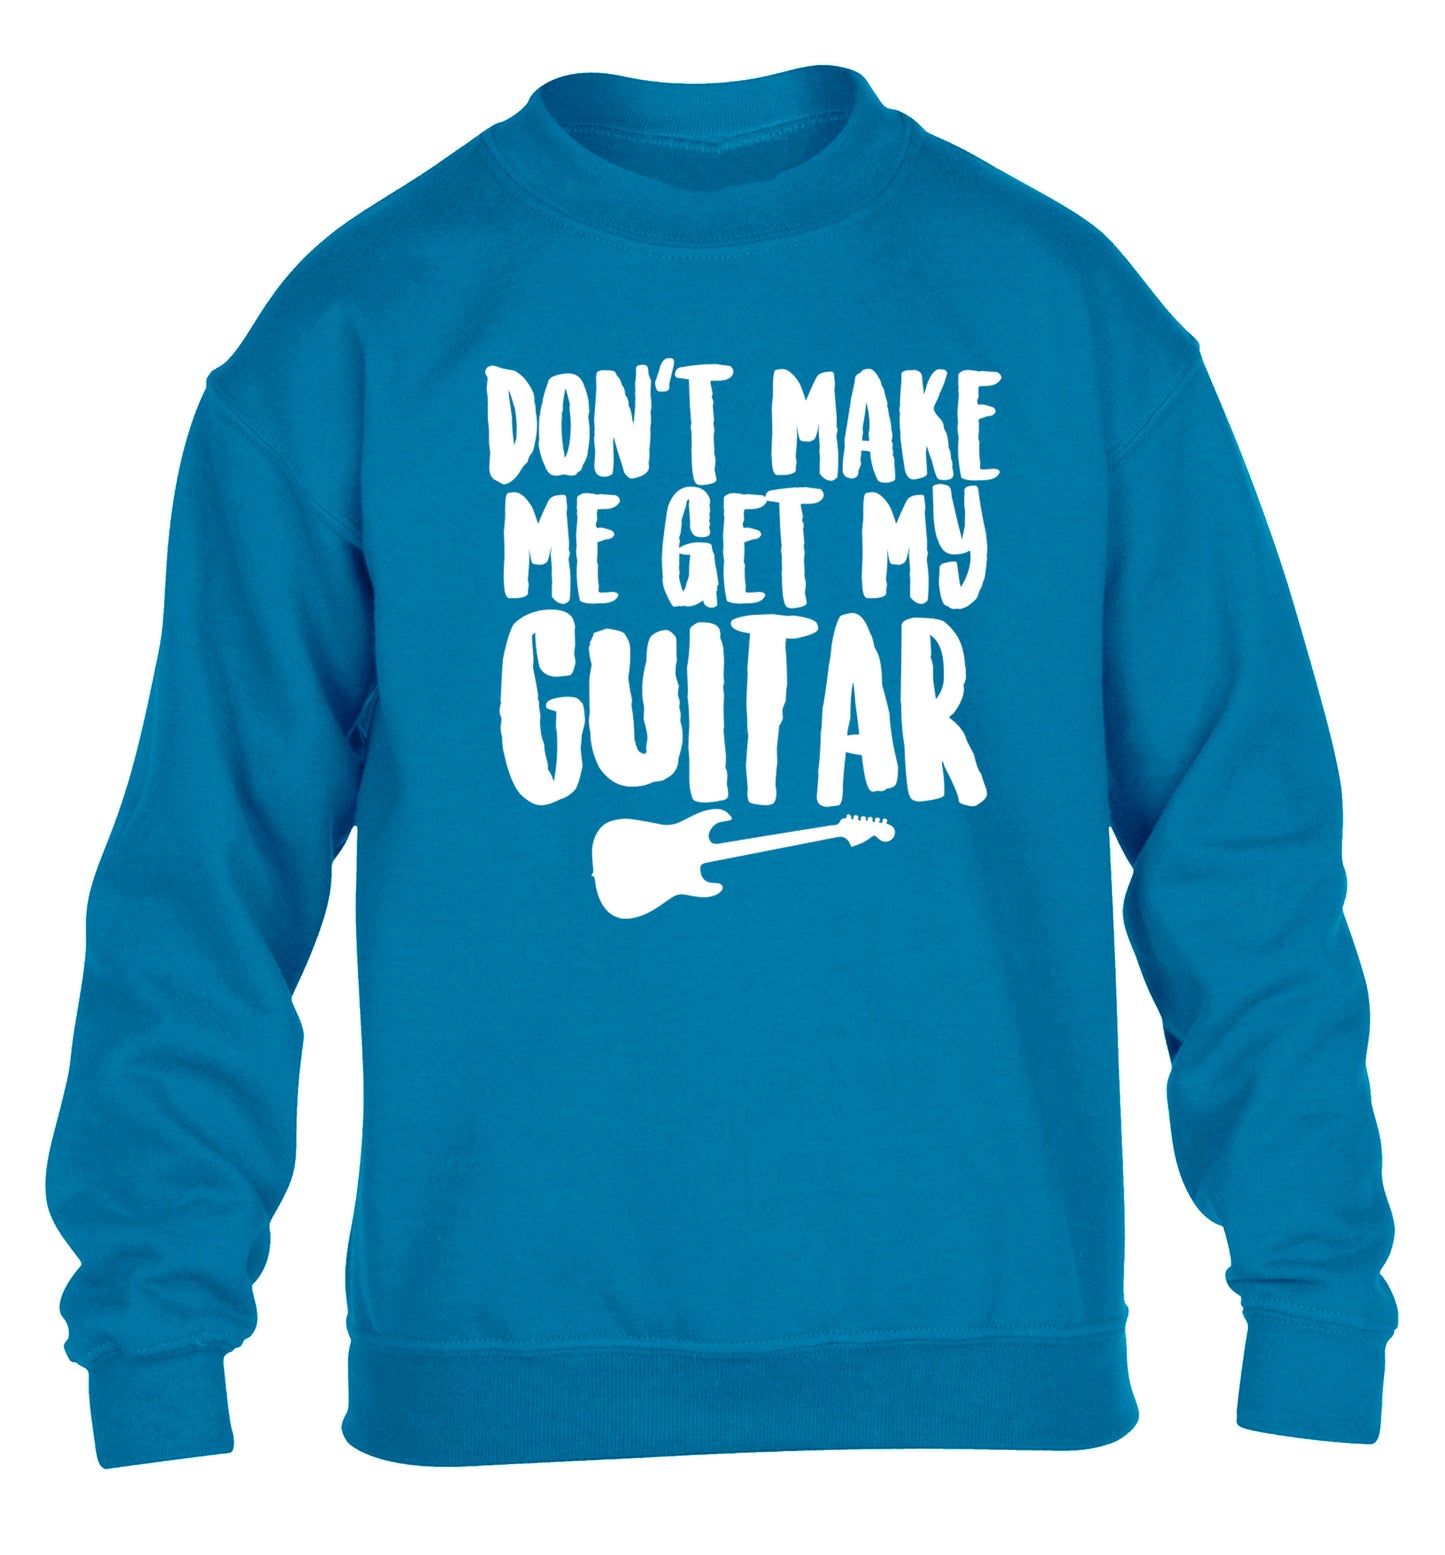 Don't make me get my guitar children's blue sweater 12-13 Years